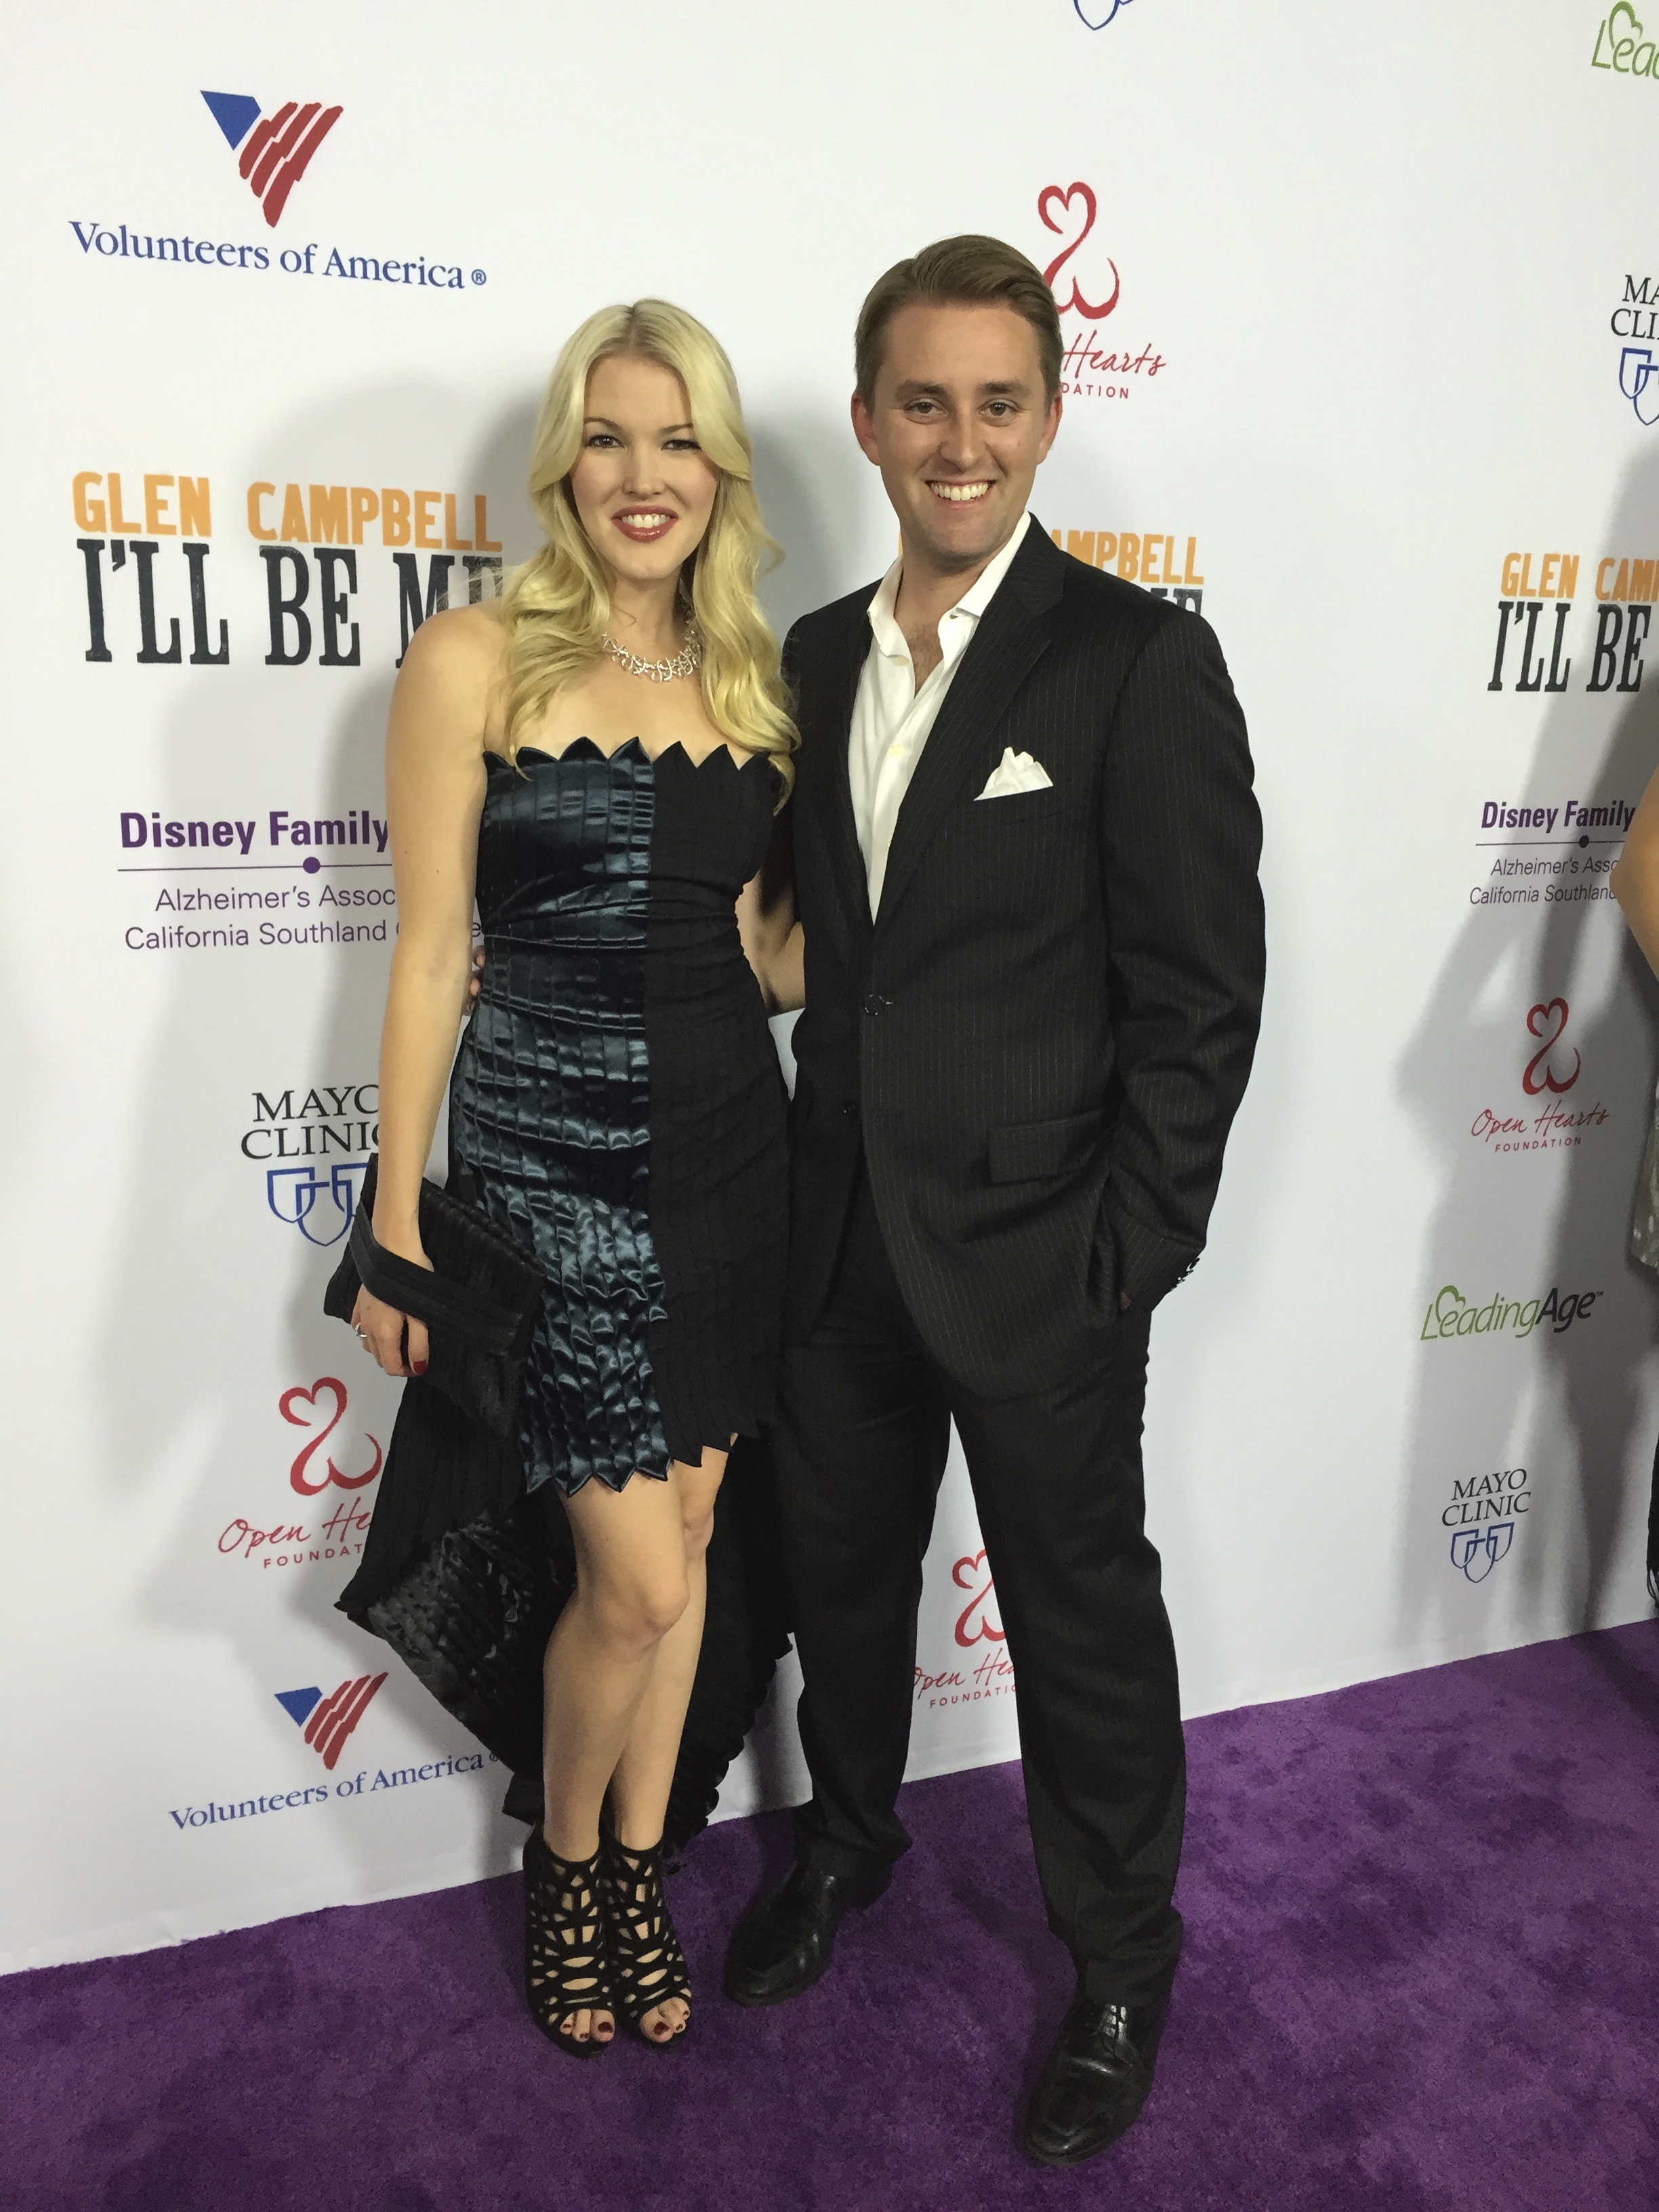 David Sheftell and Ashley Campbell at the Premier of 